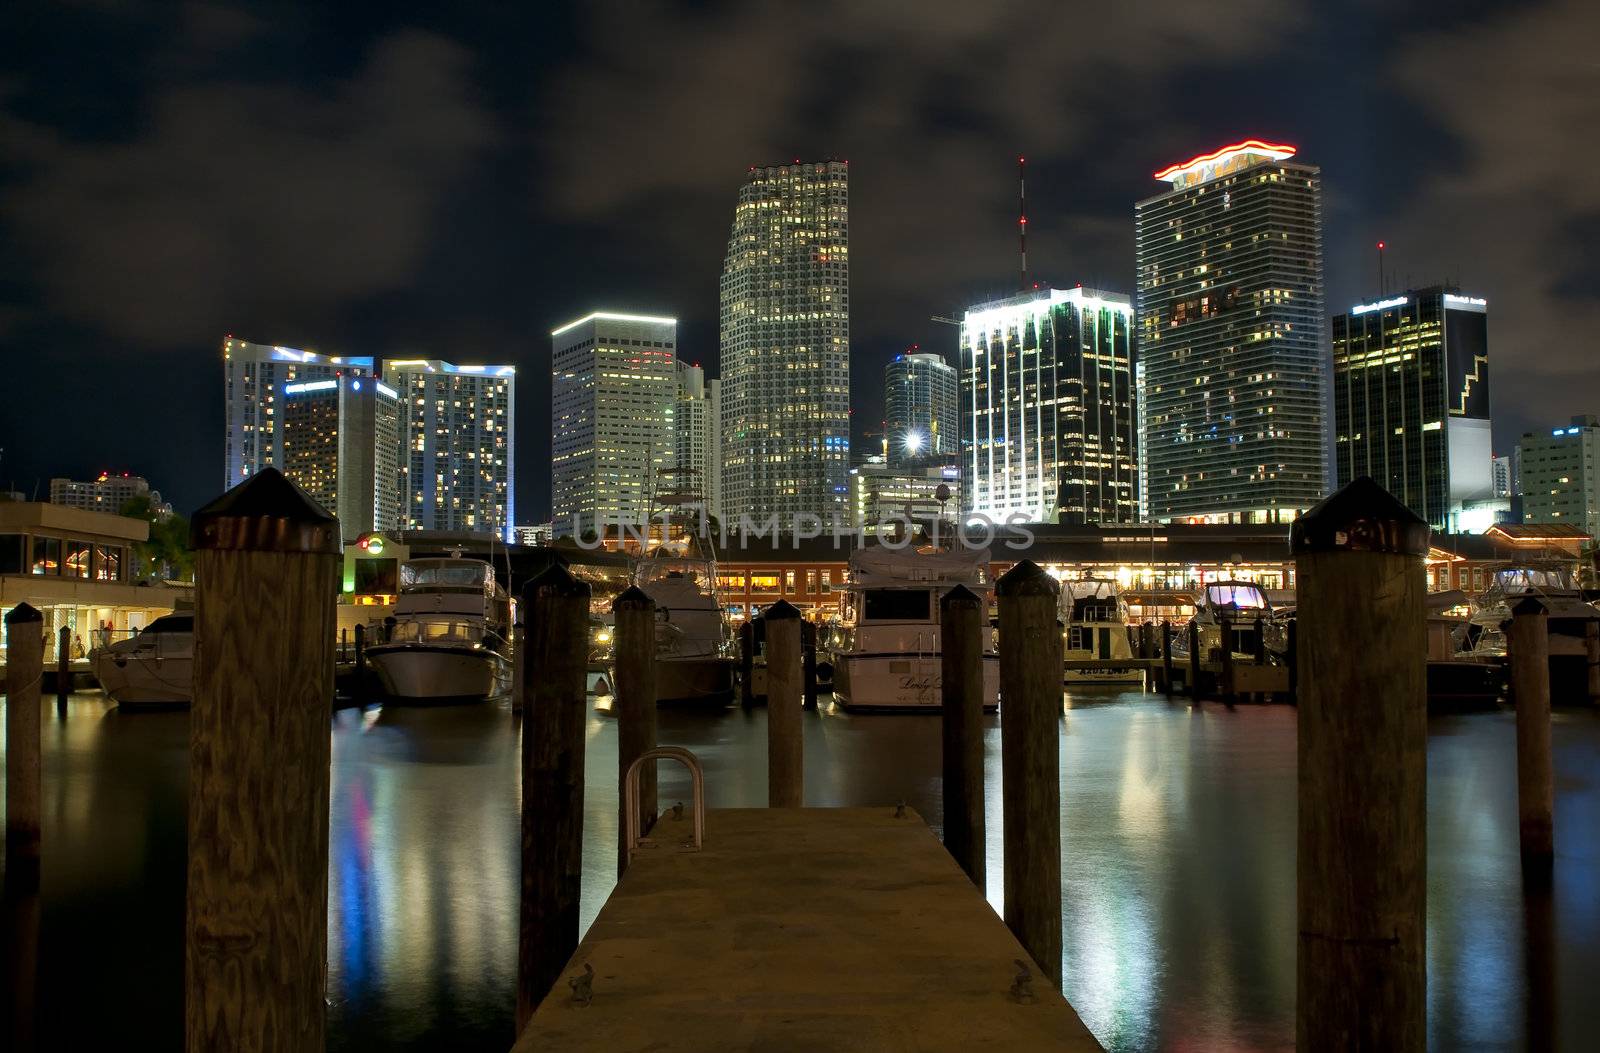 View of Downtown Miami from Marina at Biscayne Bay.